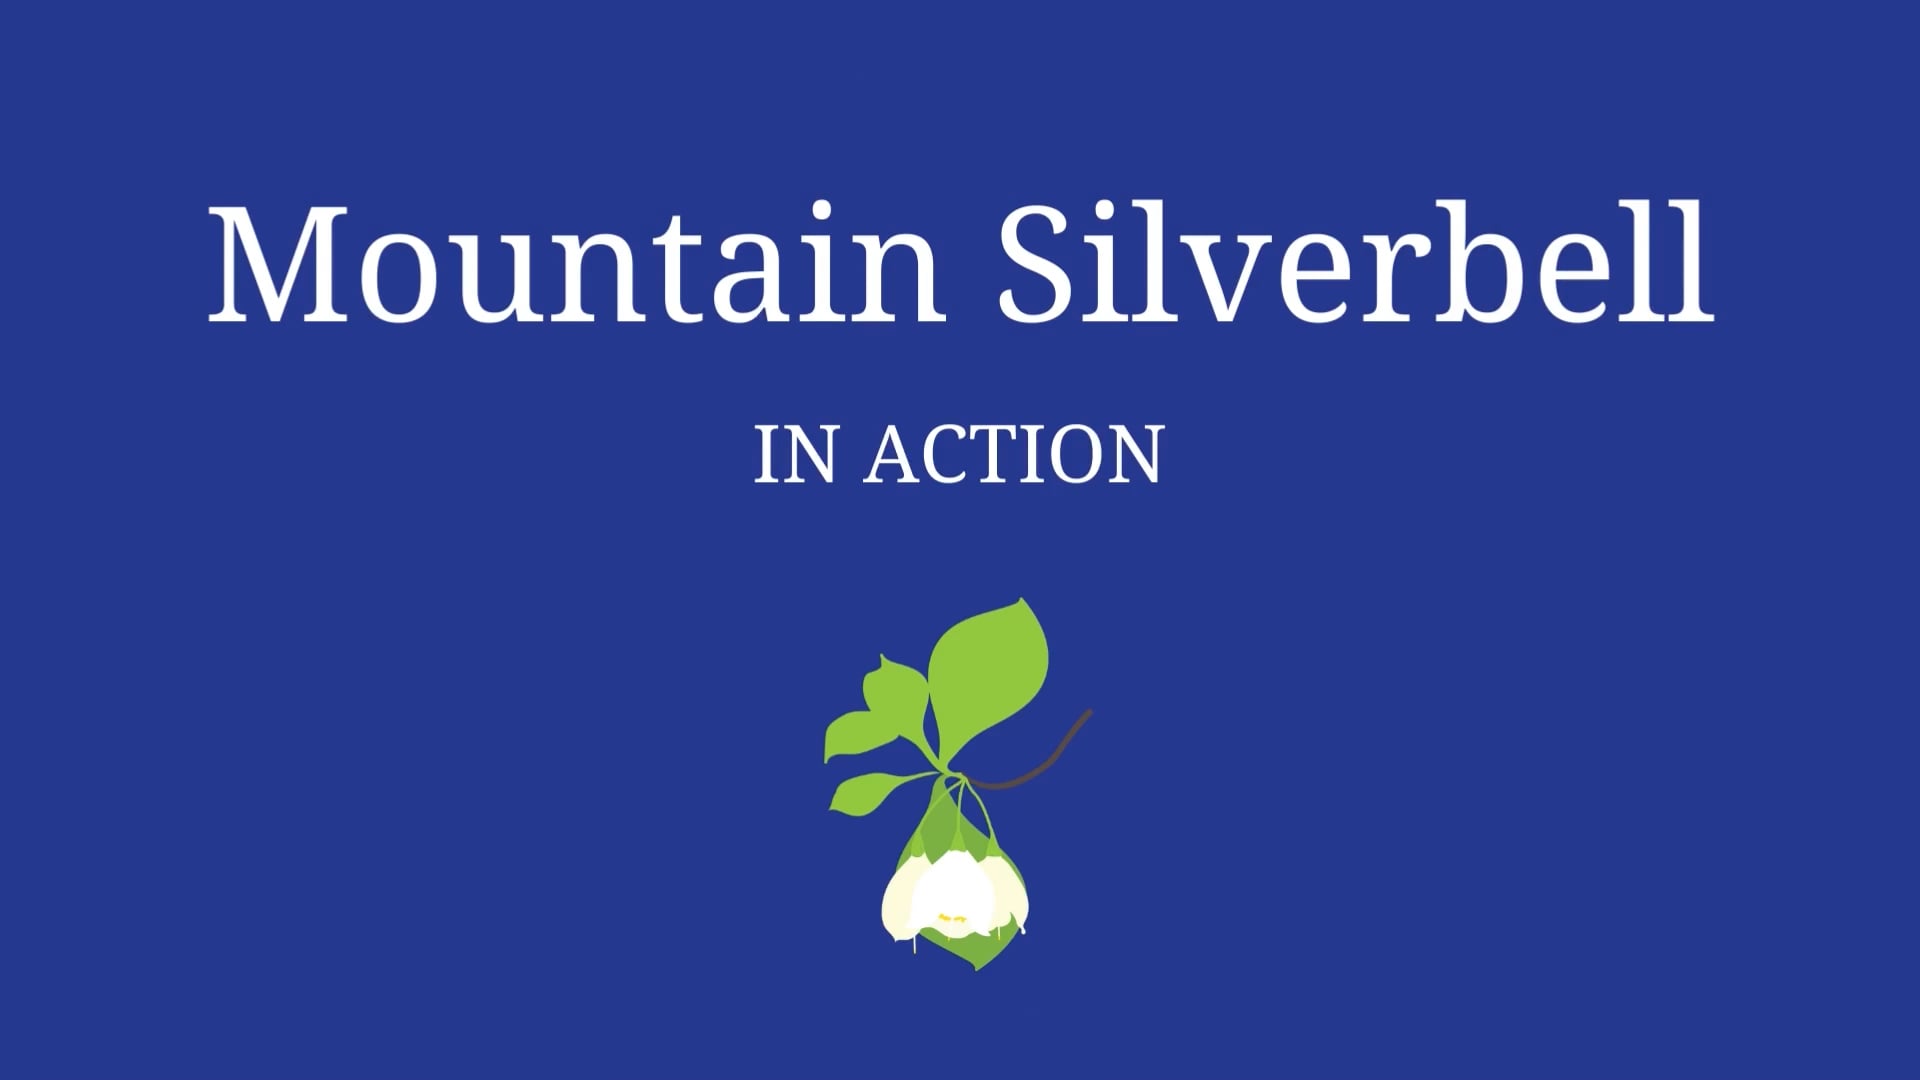 Mountain Silverbell in Action